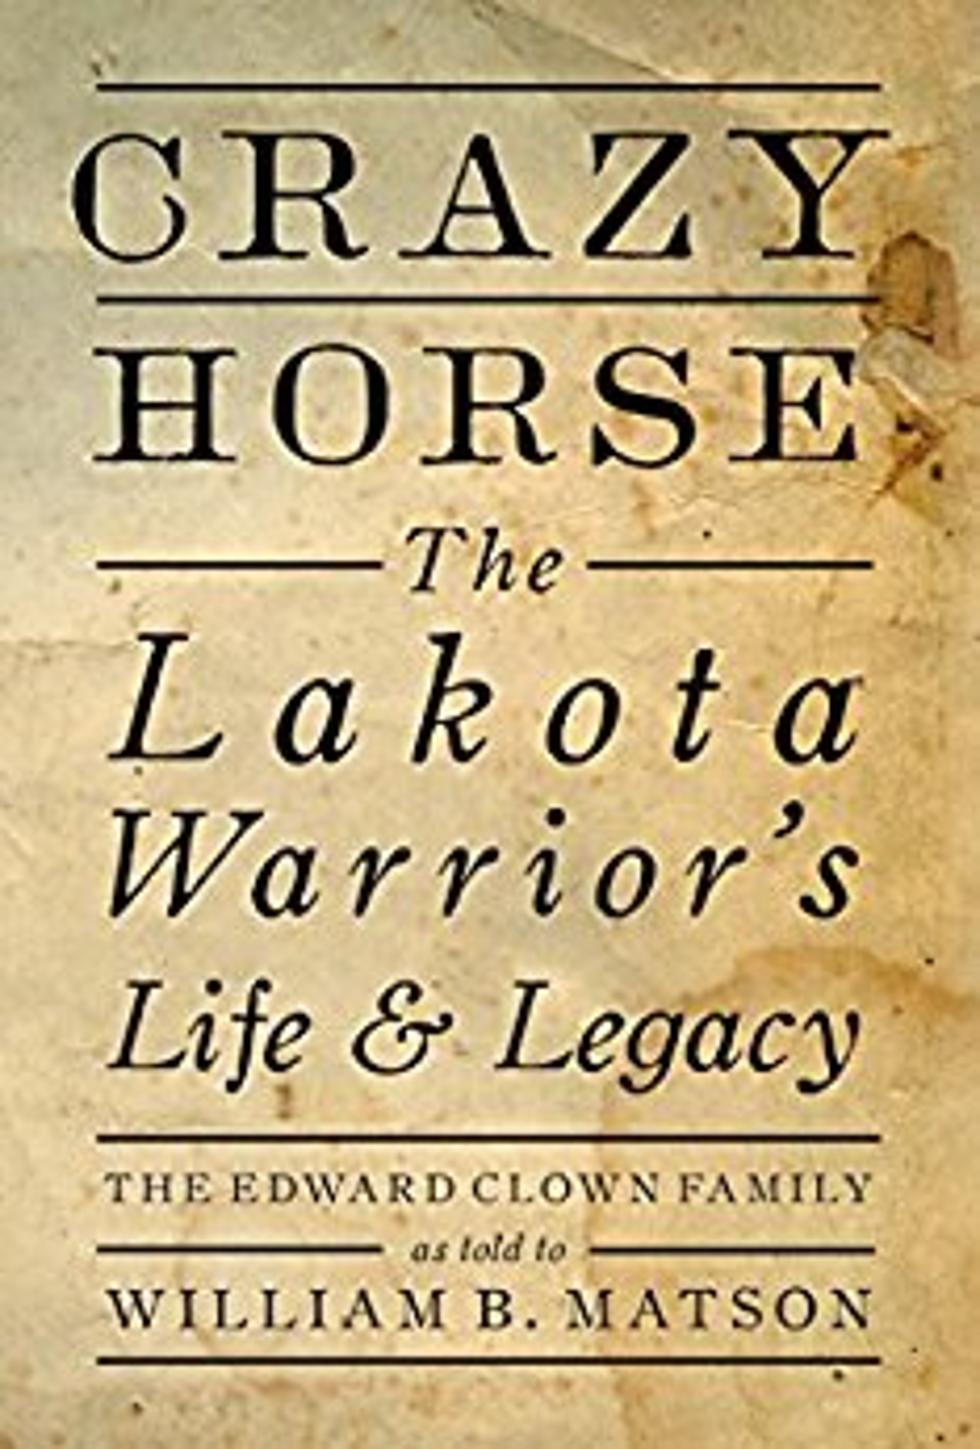 Learn About Crazy Horse at Upcoming Author Event